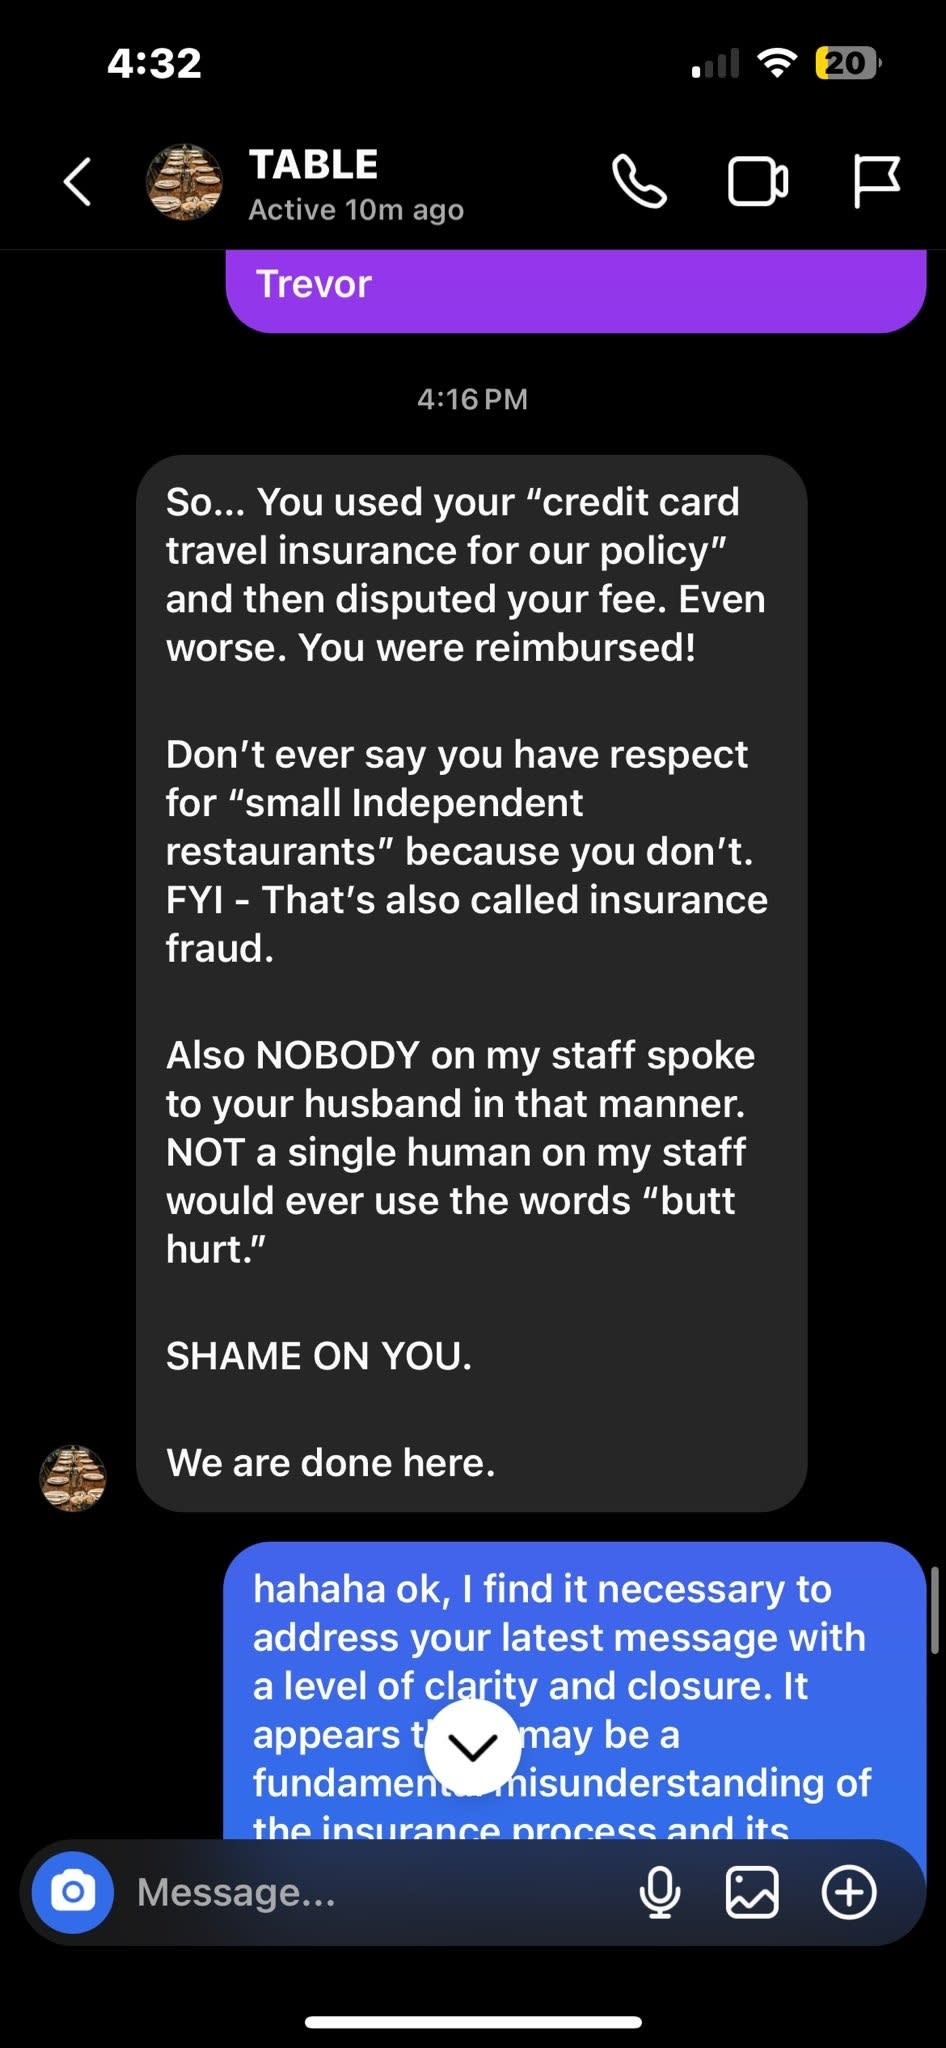 a message from Jen to Trevor claiming that he disputed the reservation fee and never spoke to staff